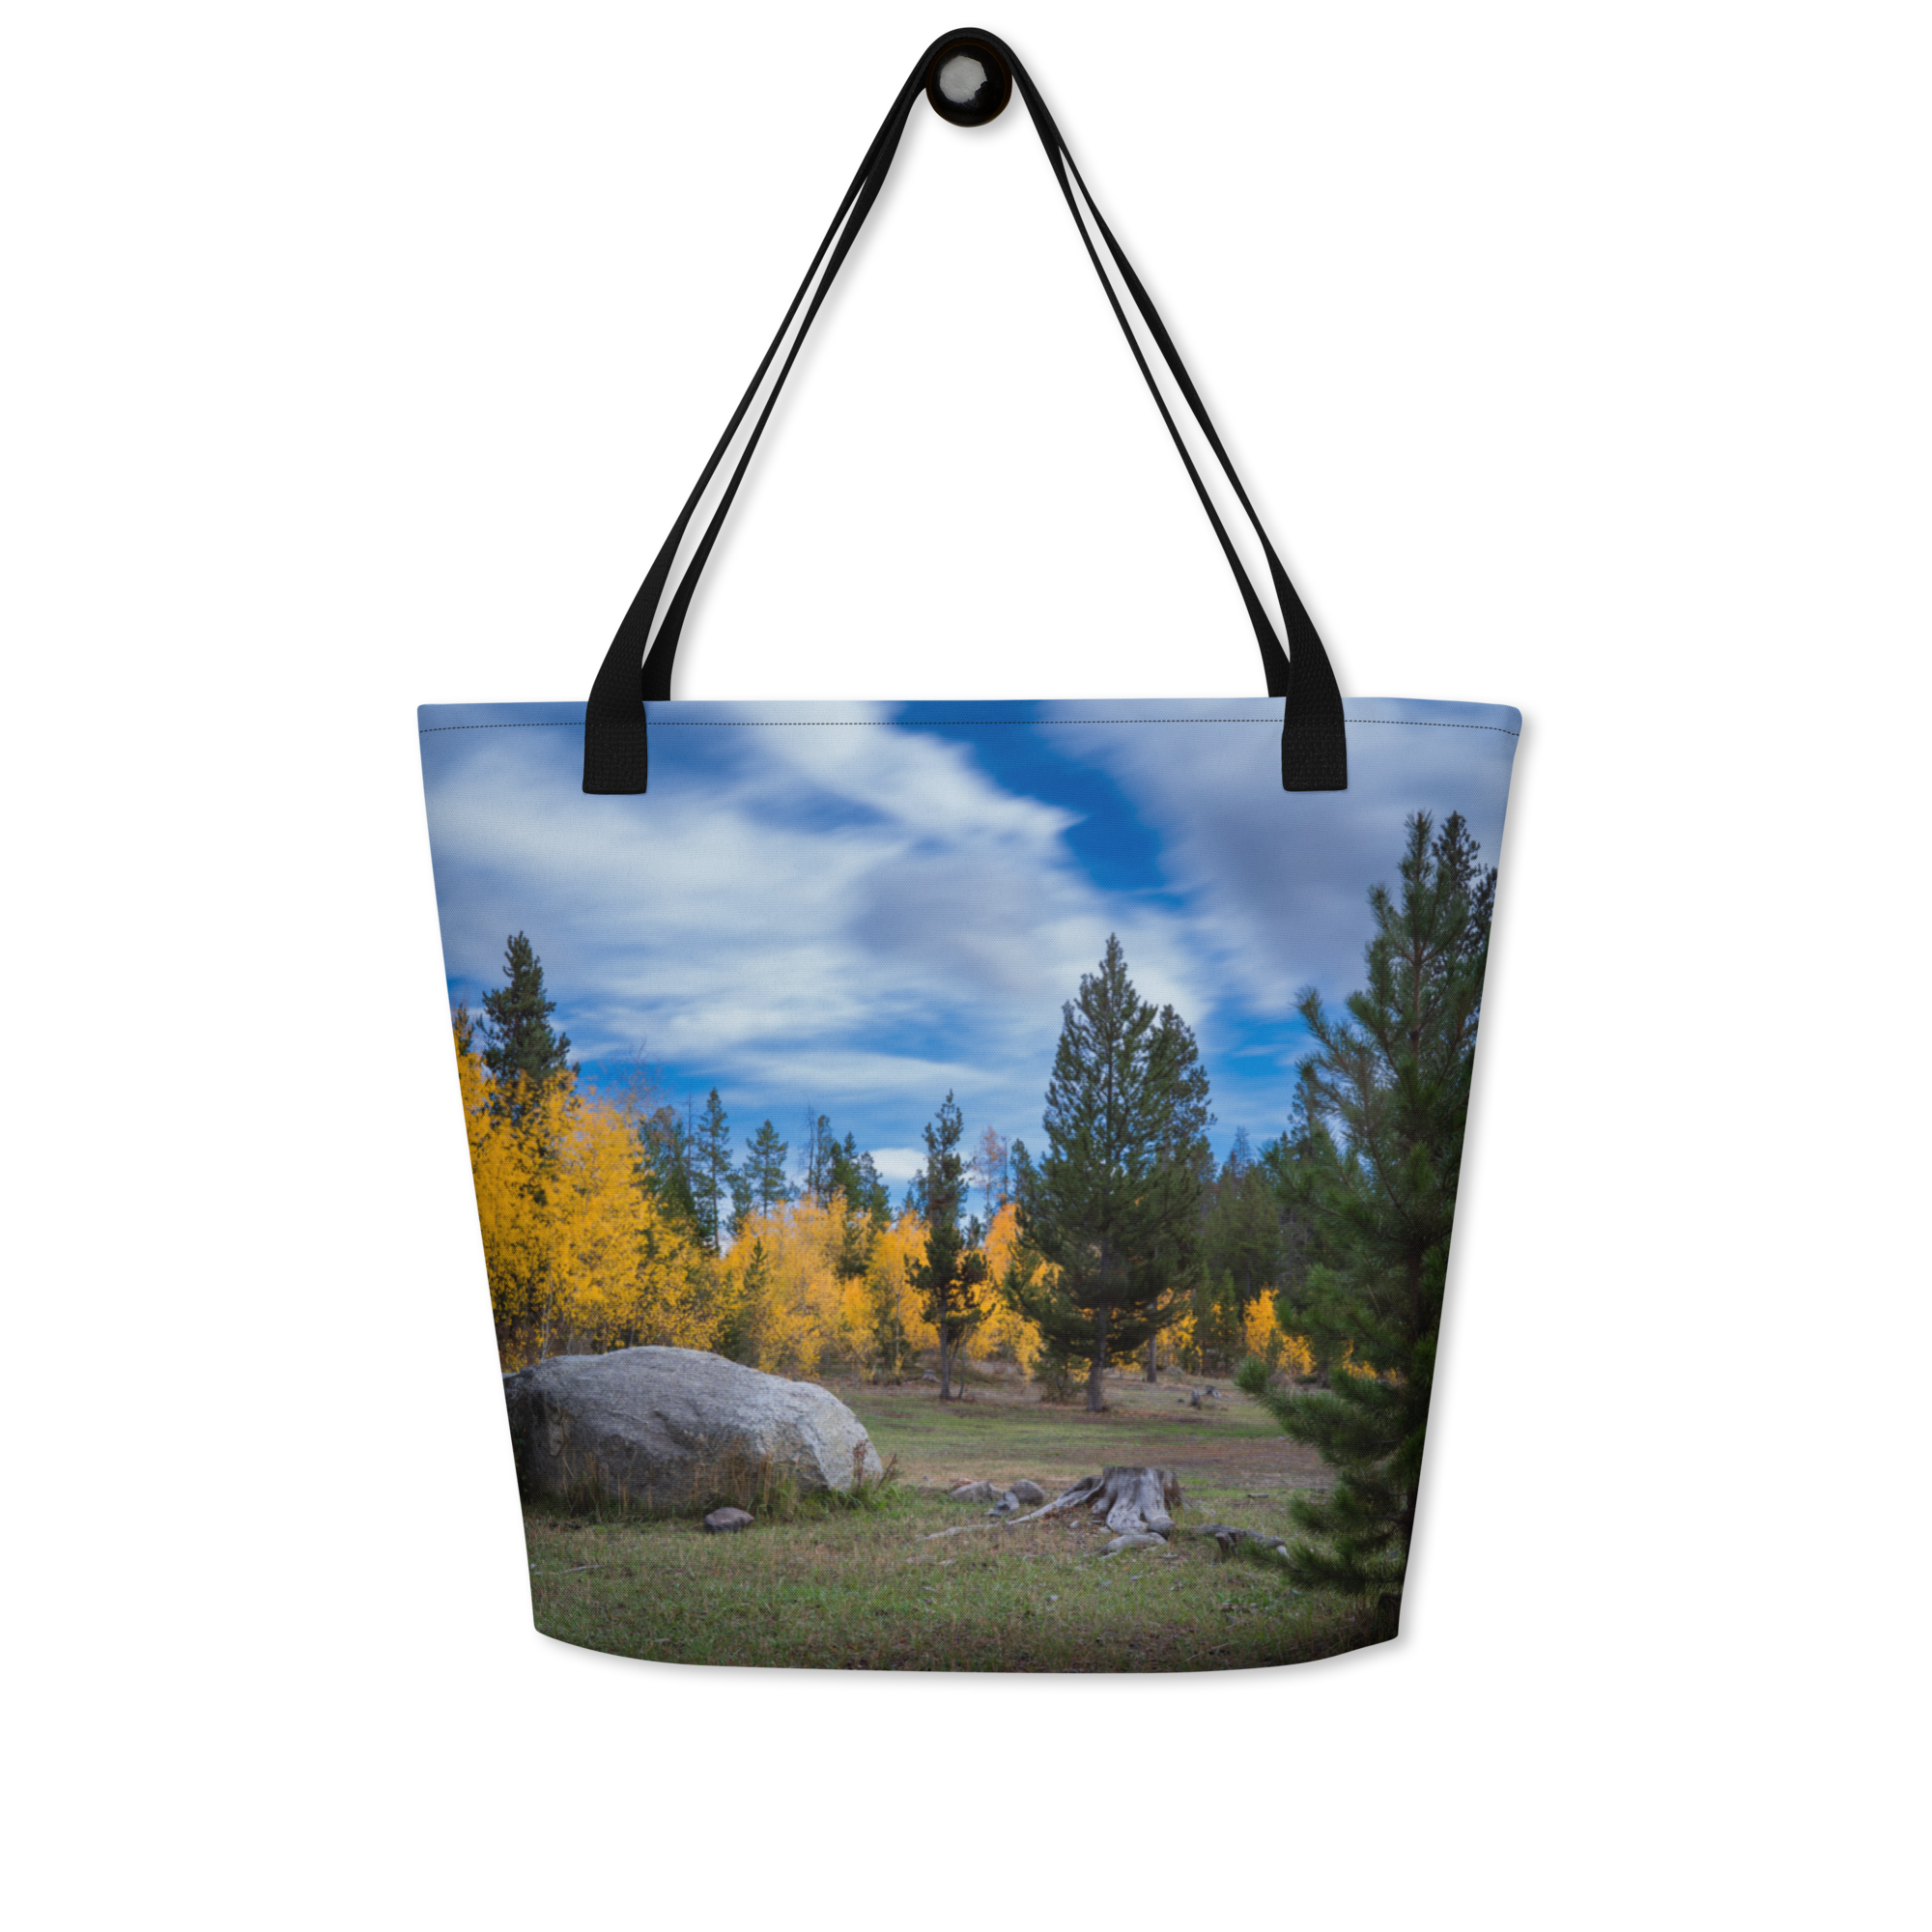 Fall in Wyoming All-Over Print Large Tote Bag